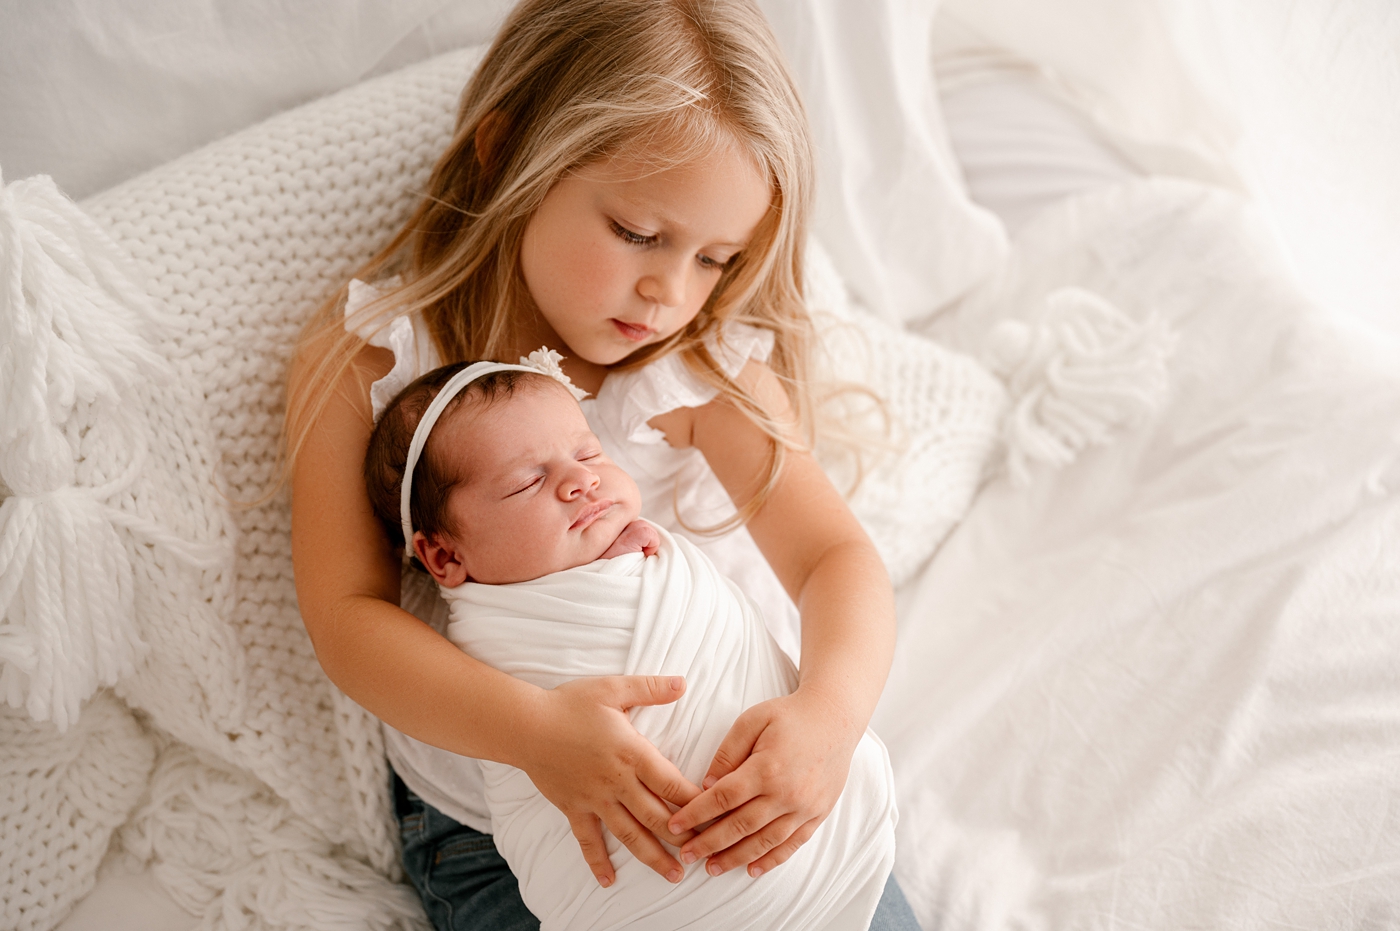 Big sister holds baby sister. Image by Meg Newton Photography.